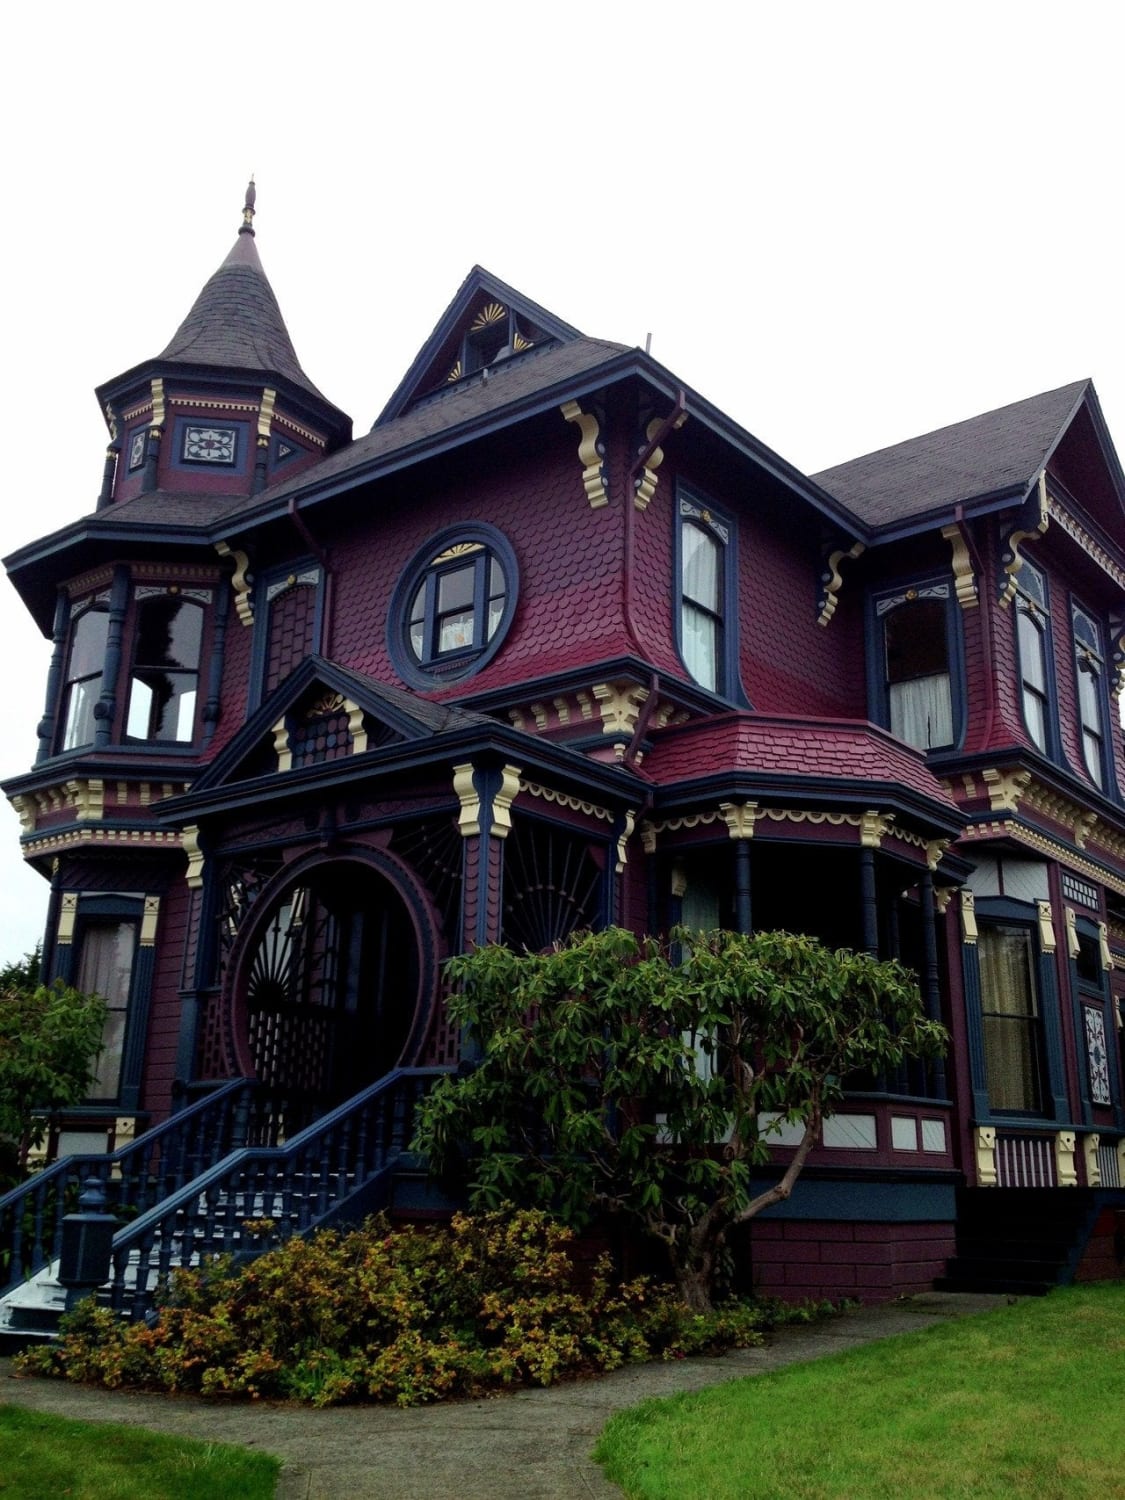 This enchanting Gothic Victorian house built in 1888 in Arcata, California